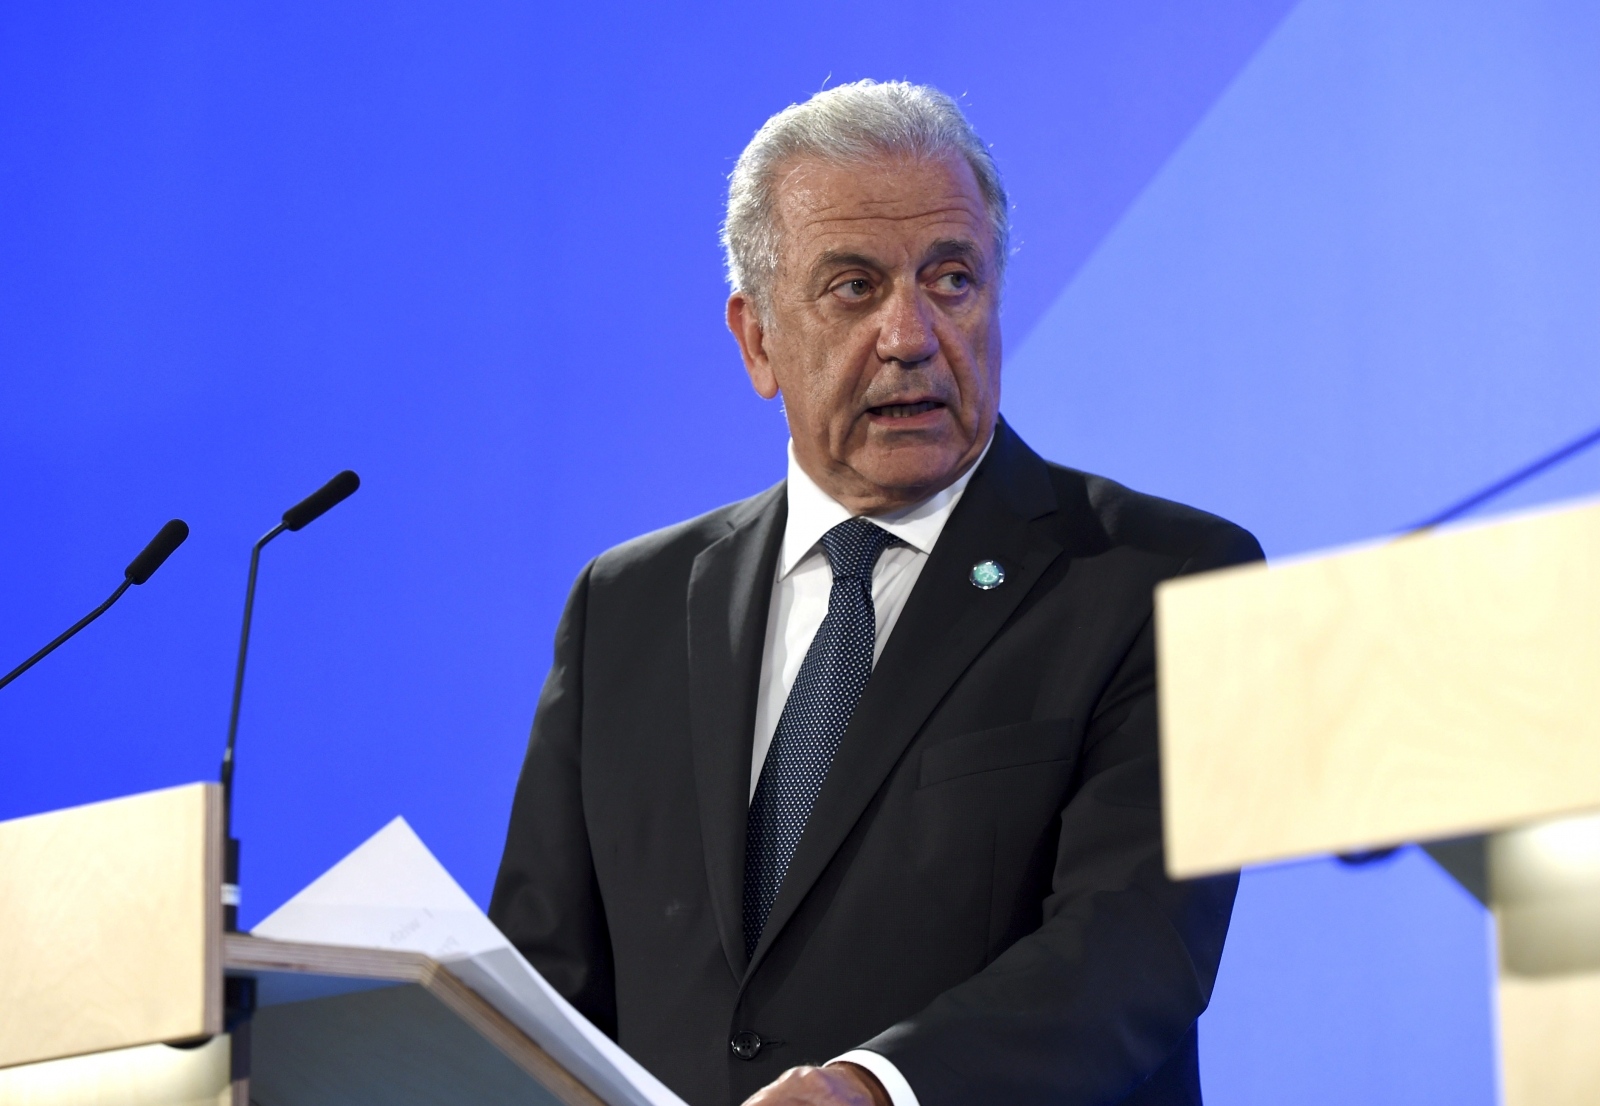 European Commissioner for Migration and Home Affairs Dimitris Avramopoulos attends a news conference in Helsinki European Commissioner for Migration and Home Affairs Dimitris Avramopoulos attends a news conference in Helsinki, Finland, July 18, 2019.   Lehtikuva/Emmi Korhonen via REUTERS   ATTENTION EDITORS - THIS IMAGE WAS PROVIDED BY A THIRD PARTY. NO THIRD PARTY SALES. NOT FOR USE BY REUTERS THIRD PARTY DISTRIBUTORS. FINLAND OUT. NO COMMERCIAL OR EDITORIAL SALES IN FINLAND. LEHTIKUVA